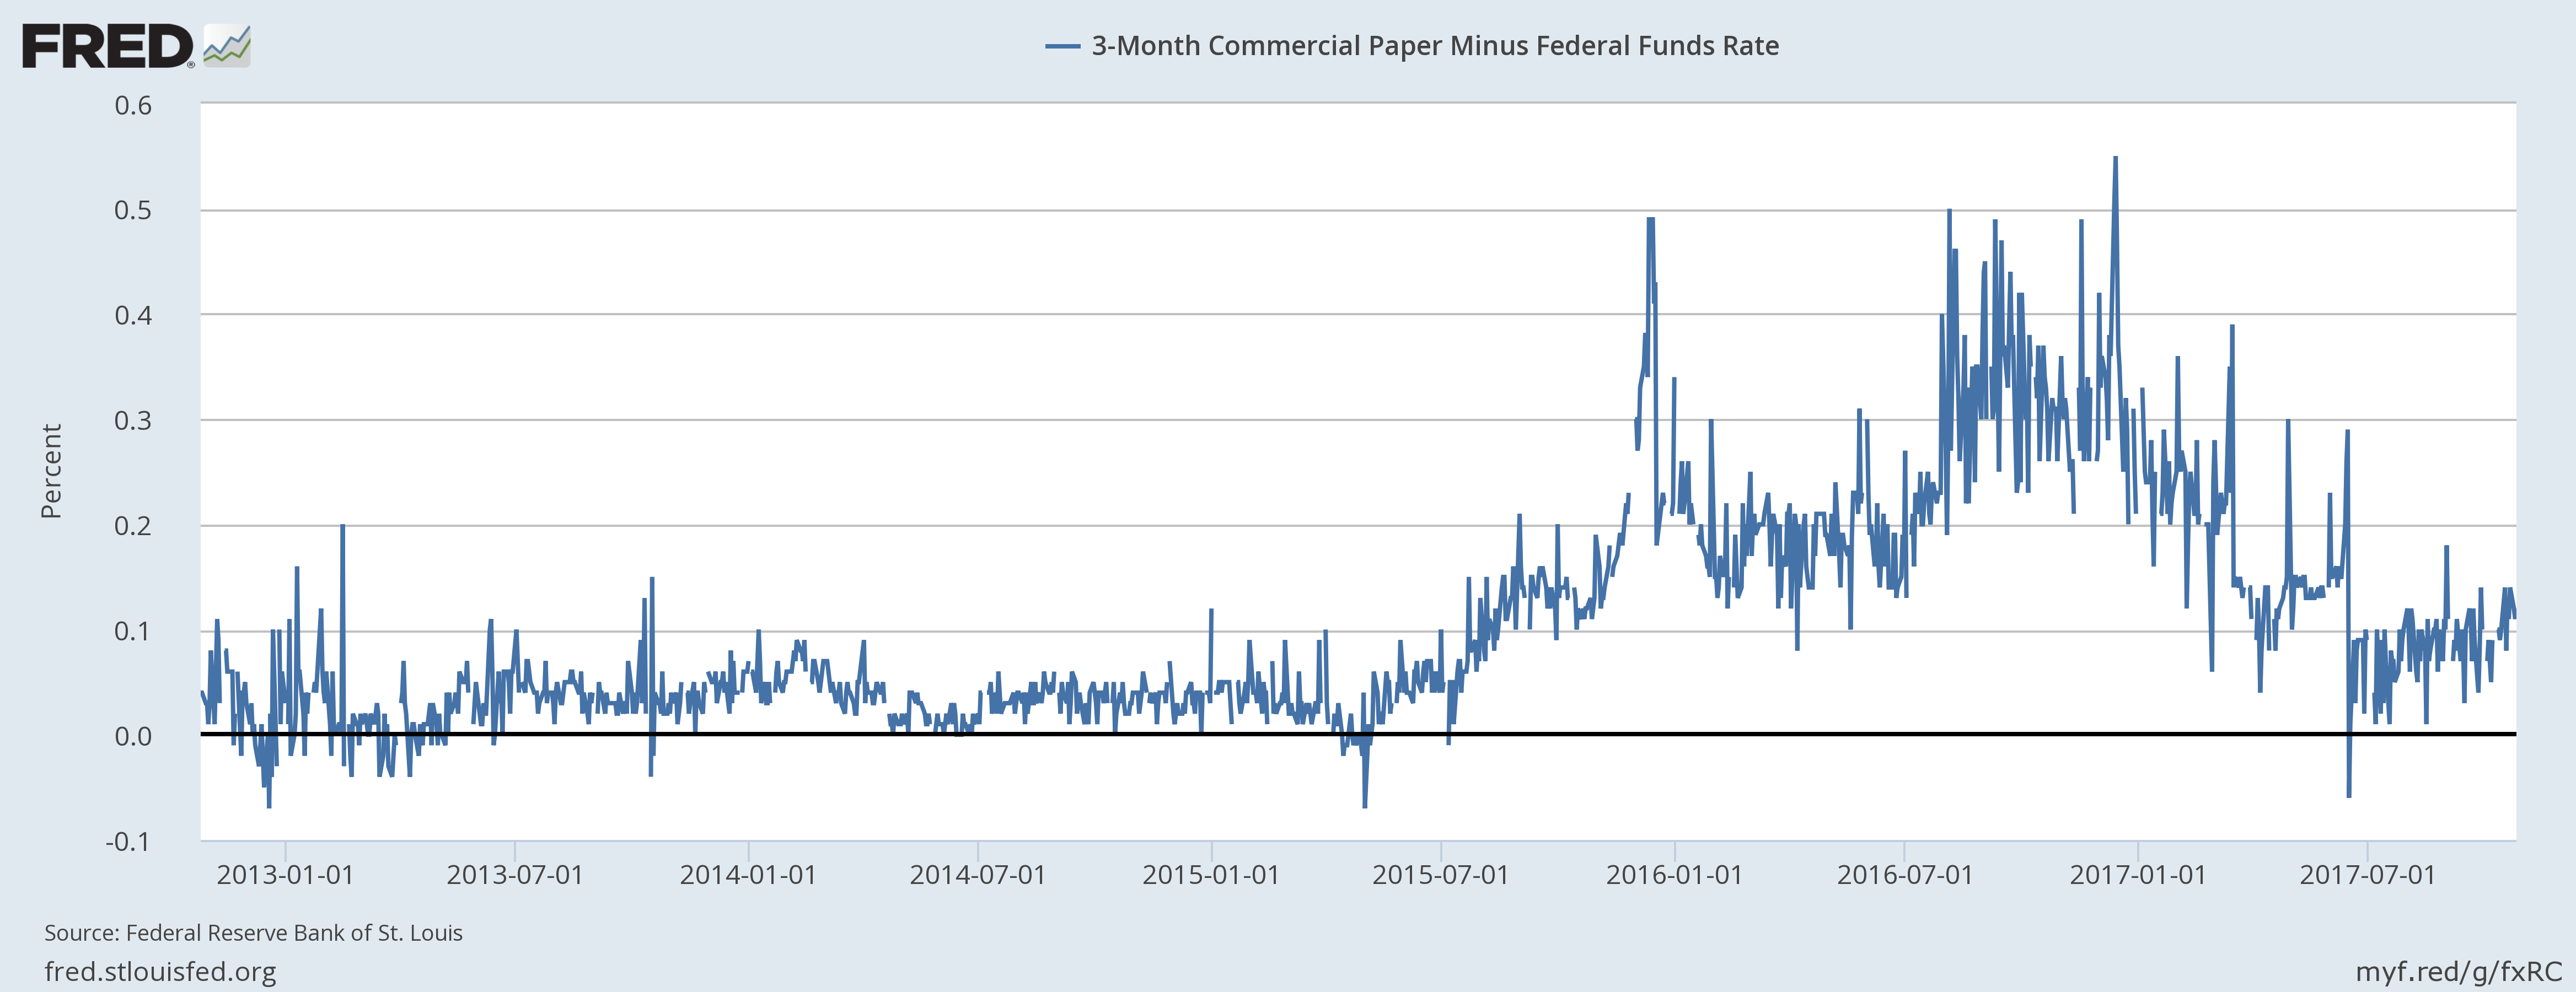 3-Month Commercial Paper Minus Federal Funds Rate